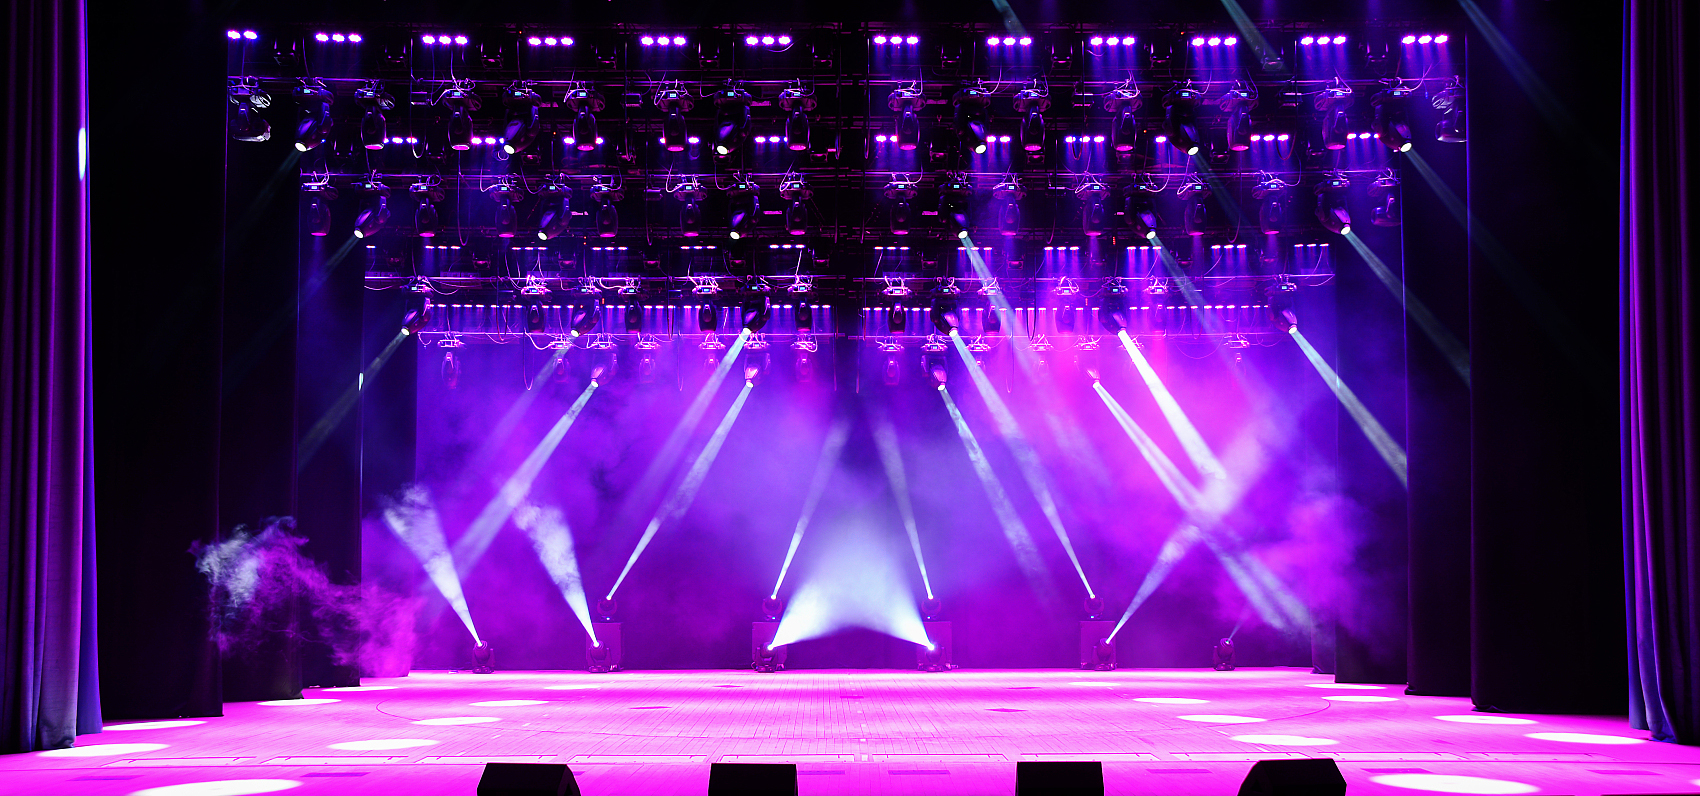 Moving Head Automated Stage Lights - Open Lighting Directory (OLPD)